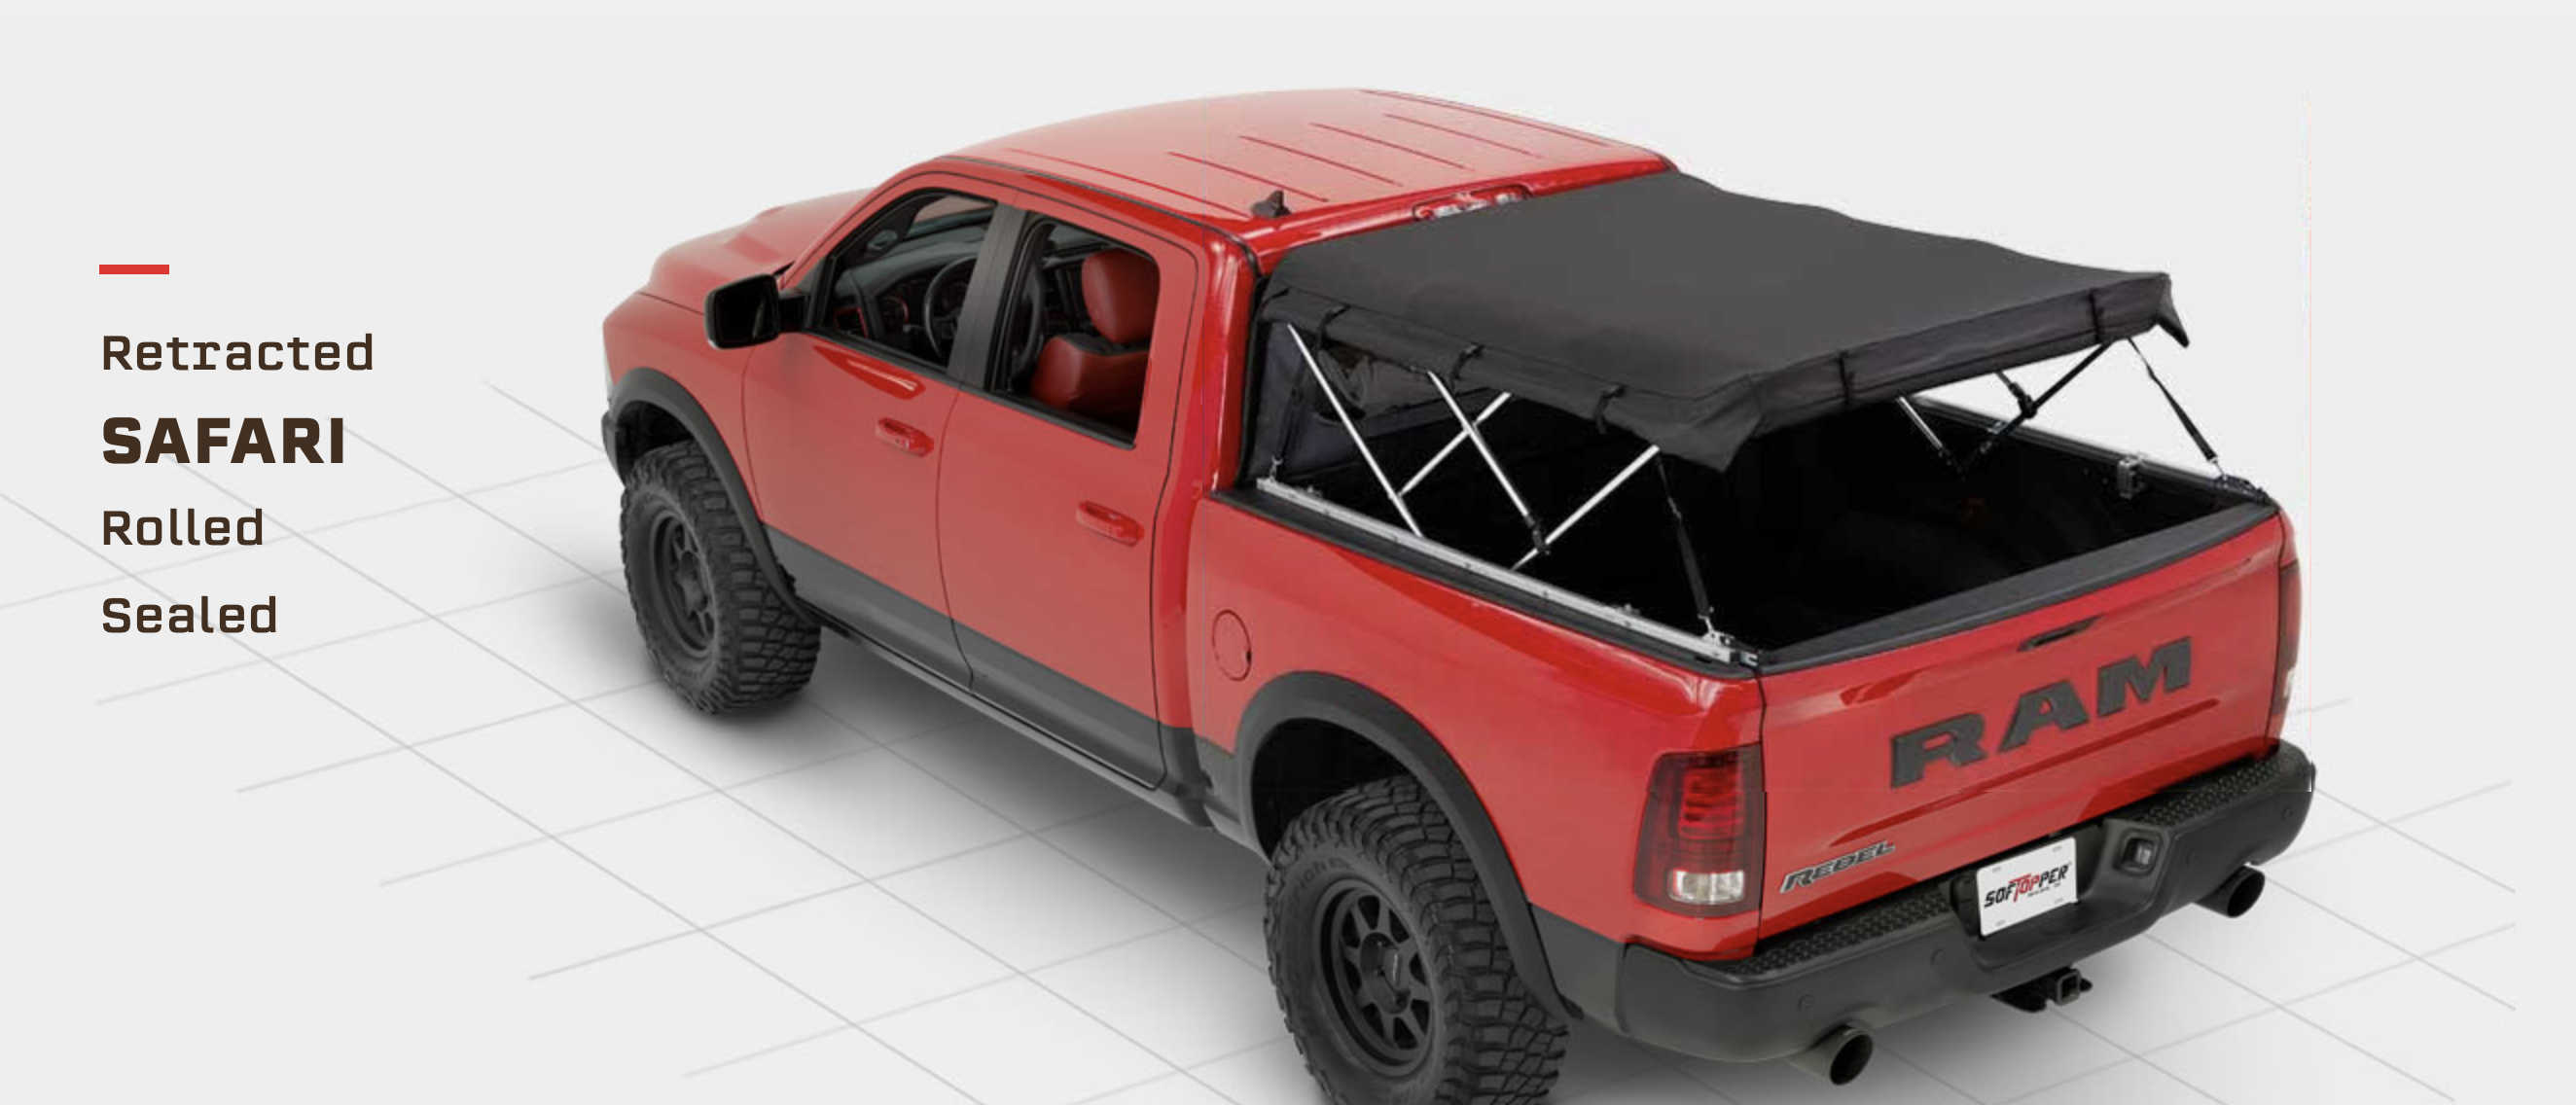 Snap Replacement Kit – Softopper – Truck Tops, SUV Tops, Accessories